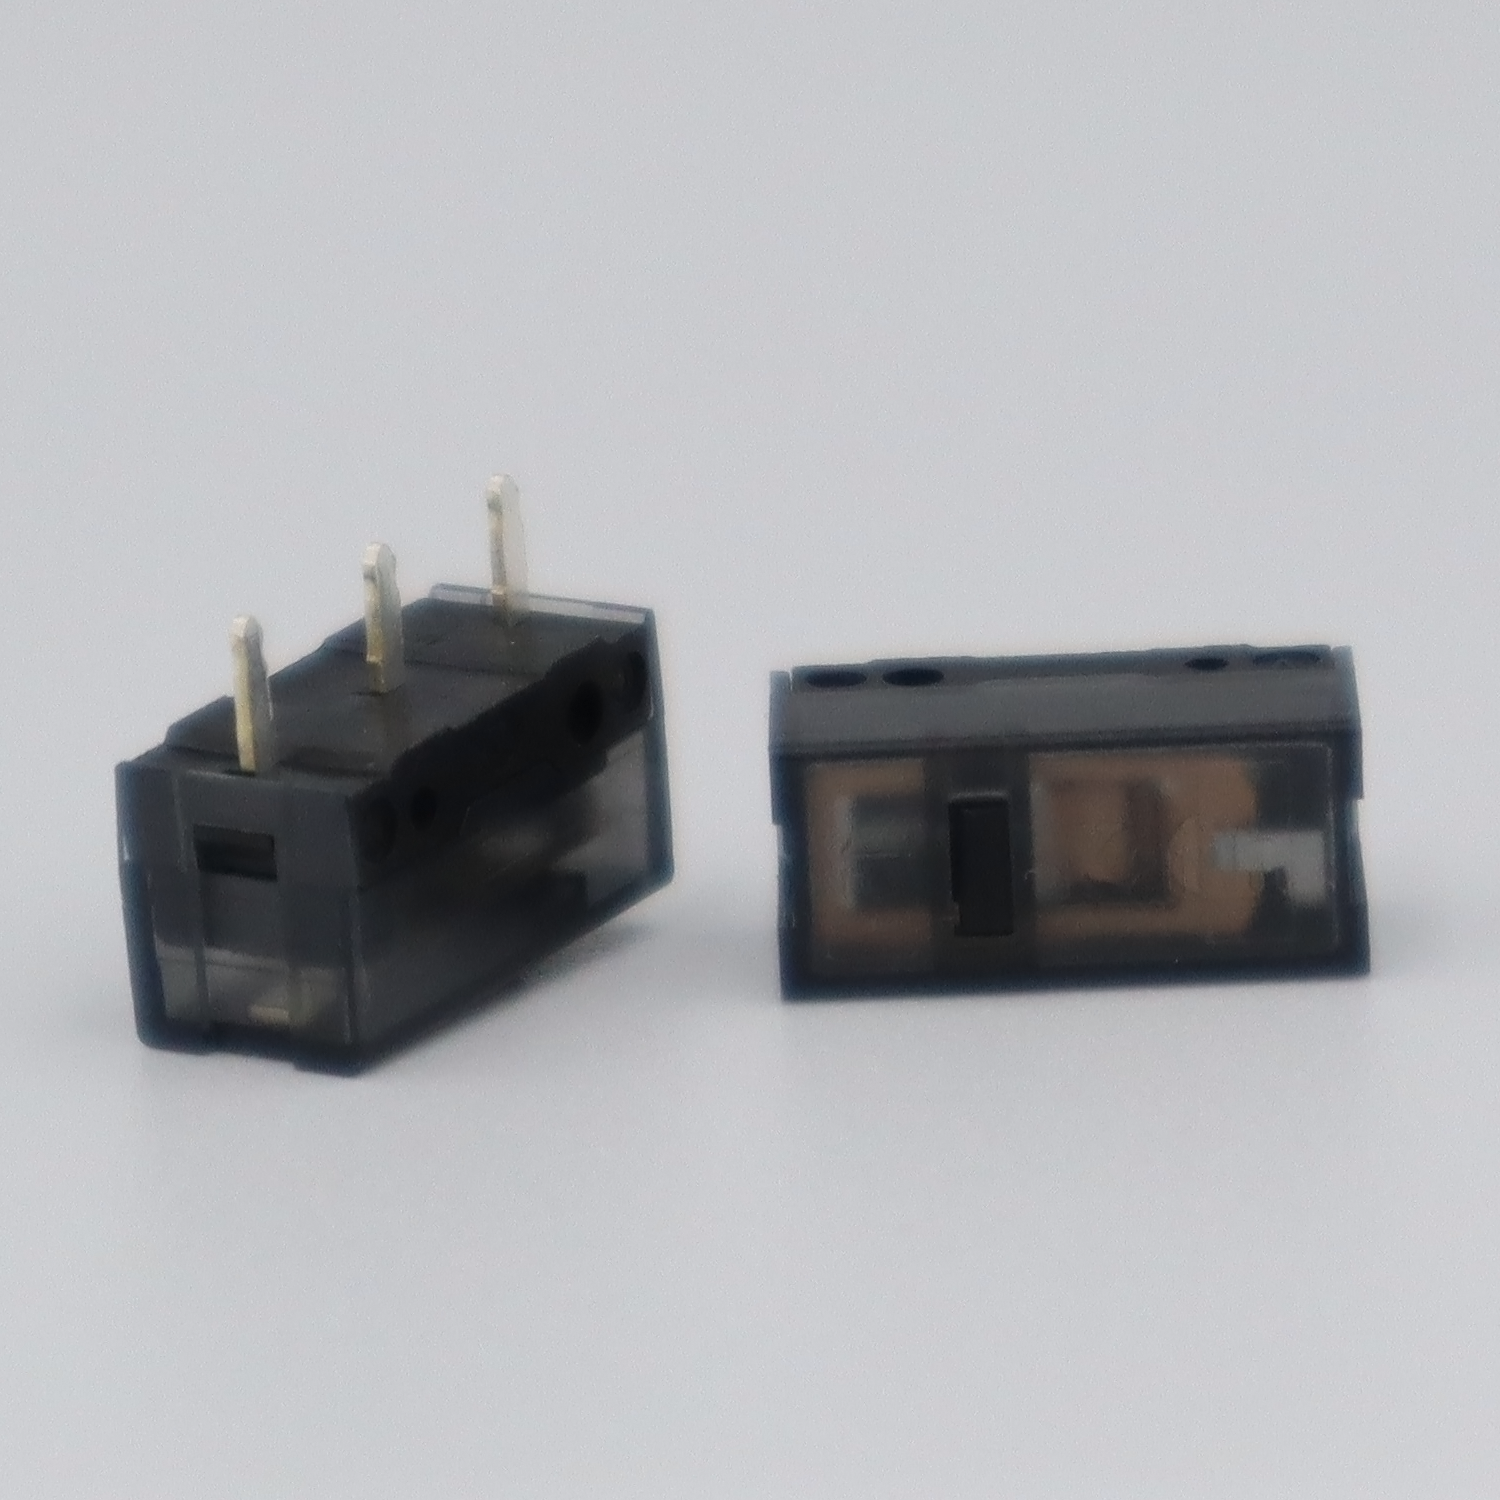 Kailh GM8.0 Mouse Switch (2 adet)